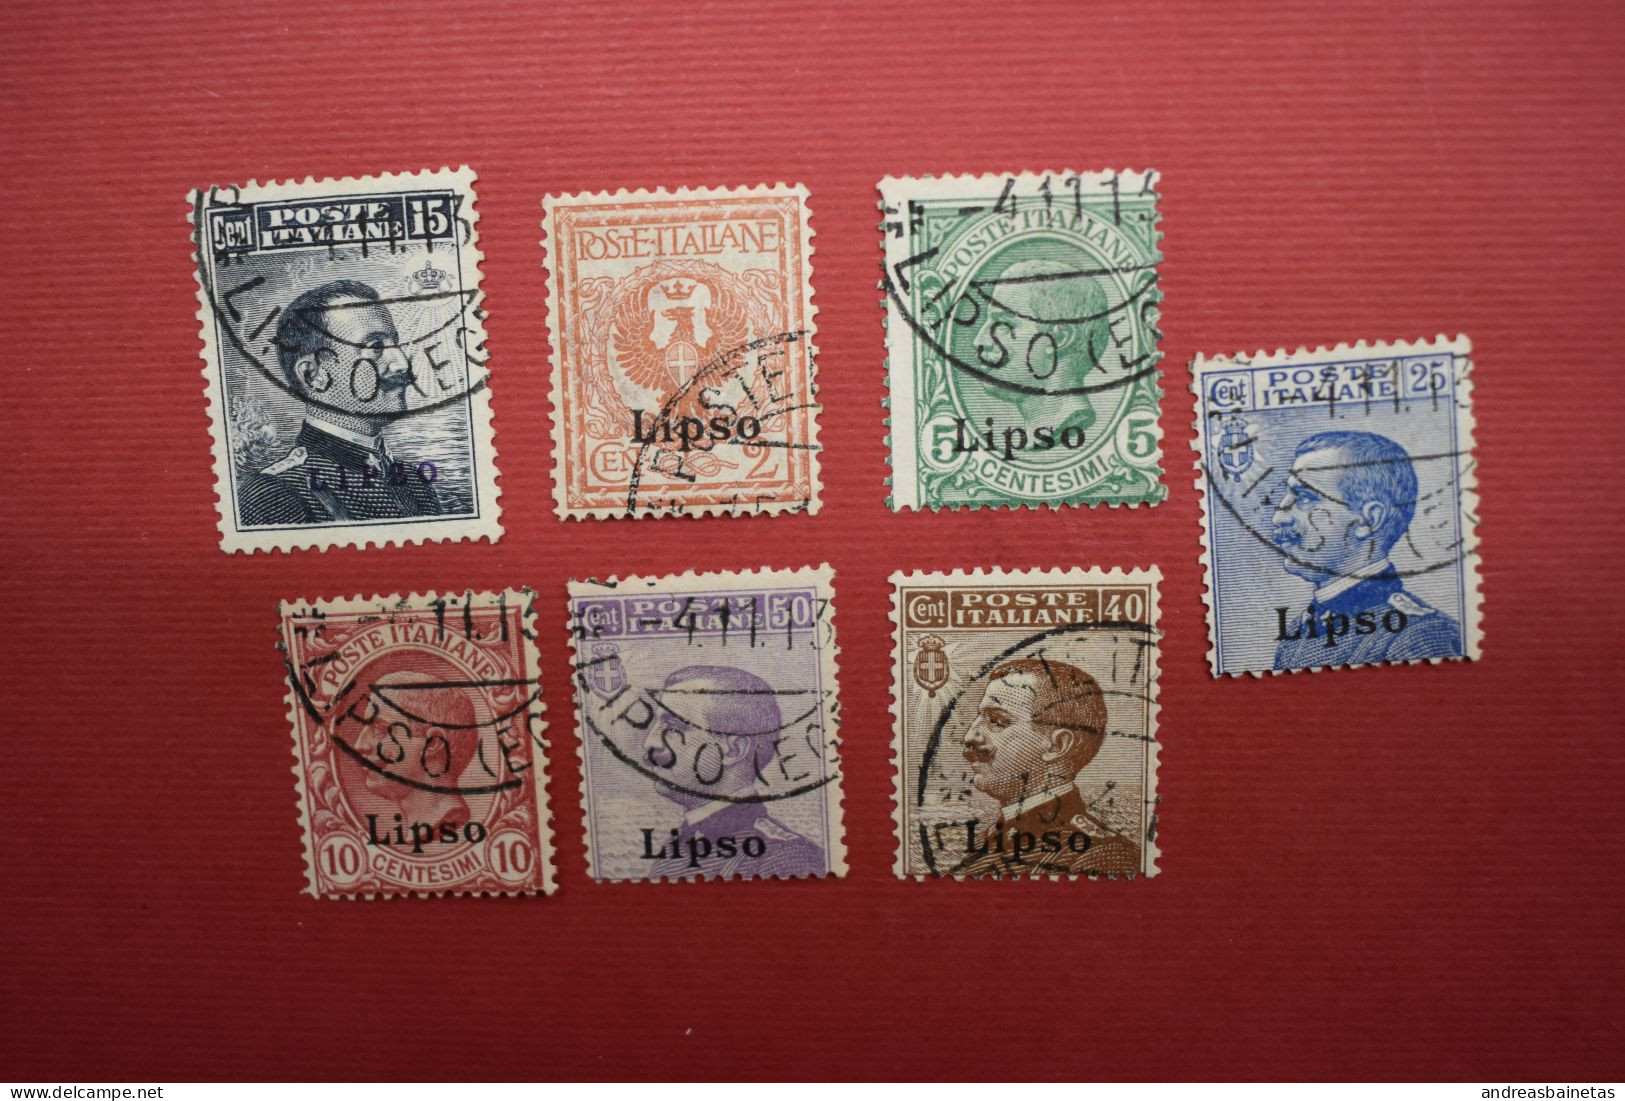 Stamps Greece ITALIAN OCCUPATION - ITALIAN POST 1912 "LIPSO" Ovpt, Complete Set Of 7 Values Used (Hellas 3VII/9VII). - Dodekanisos